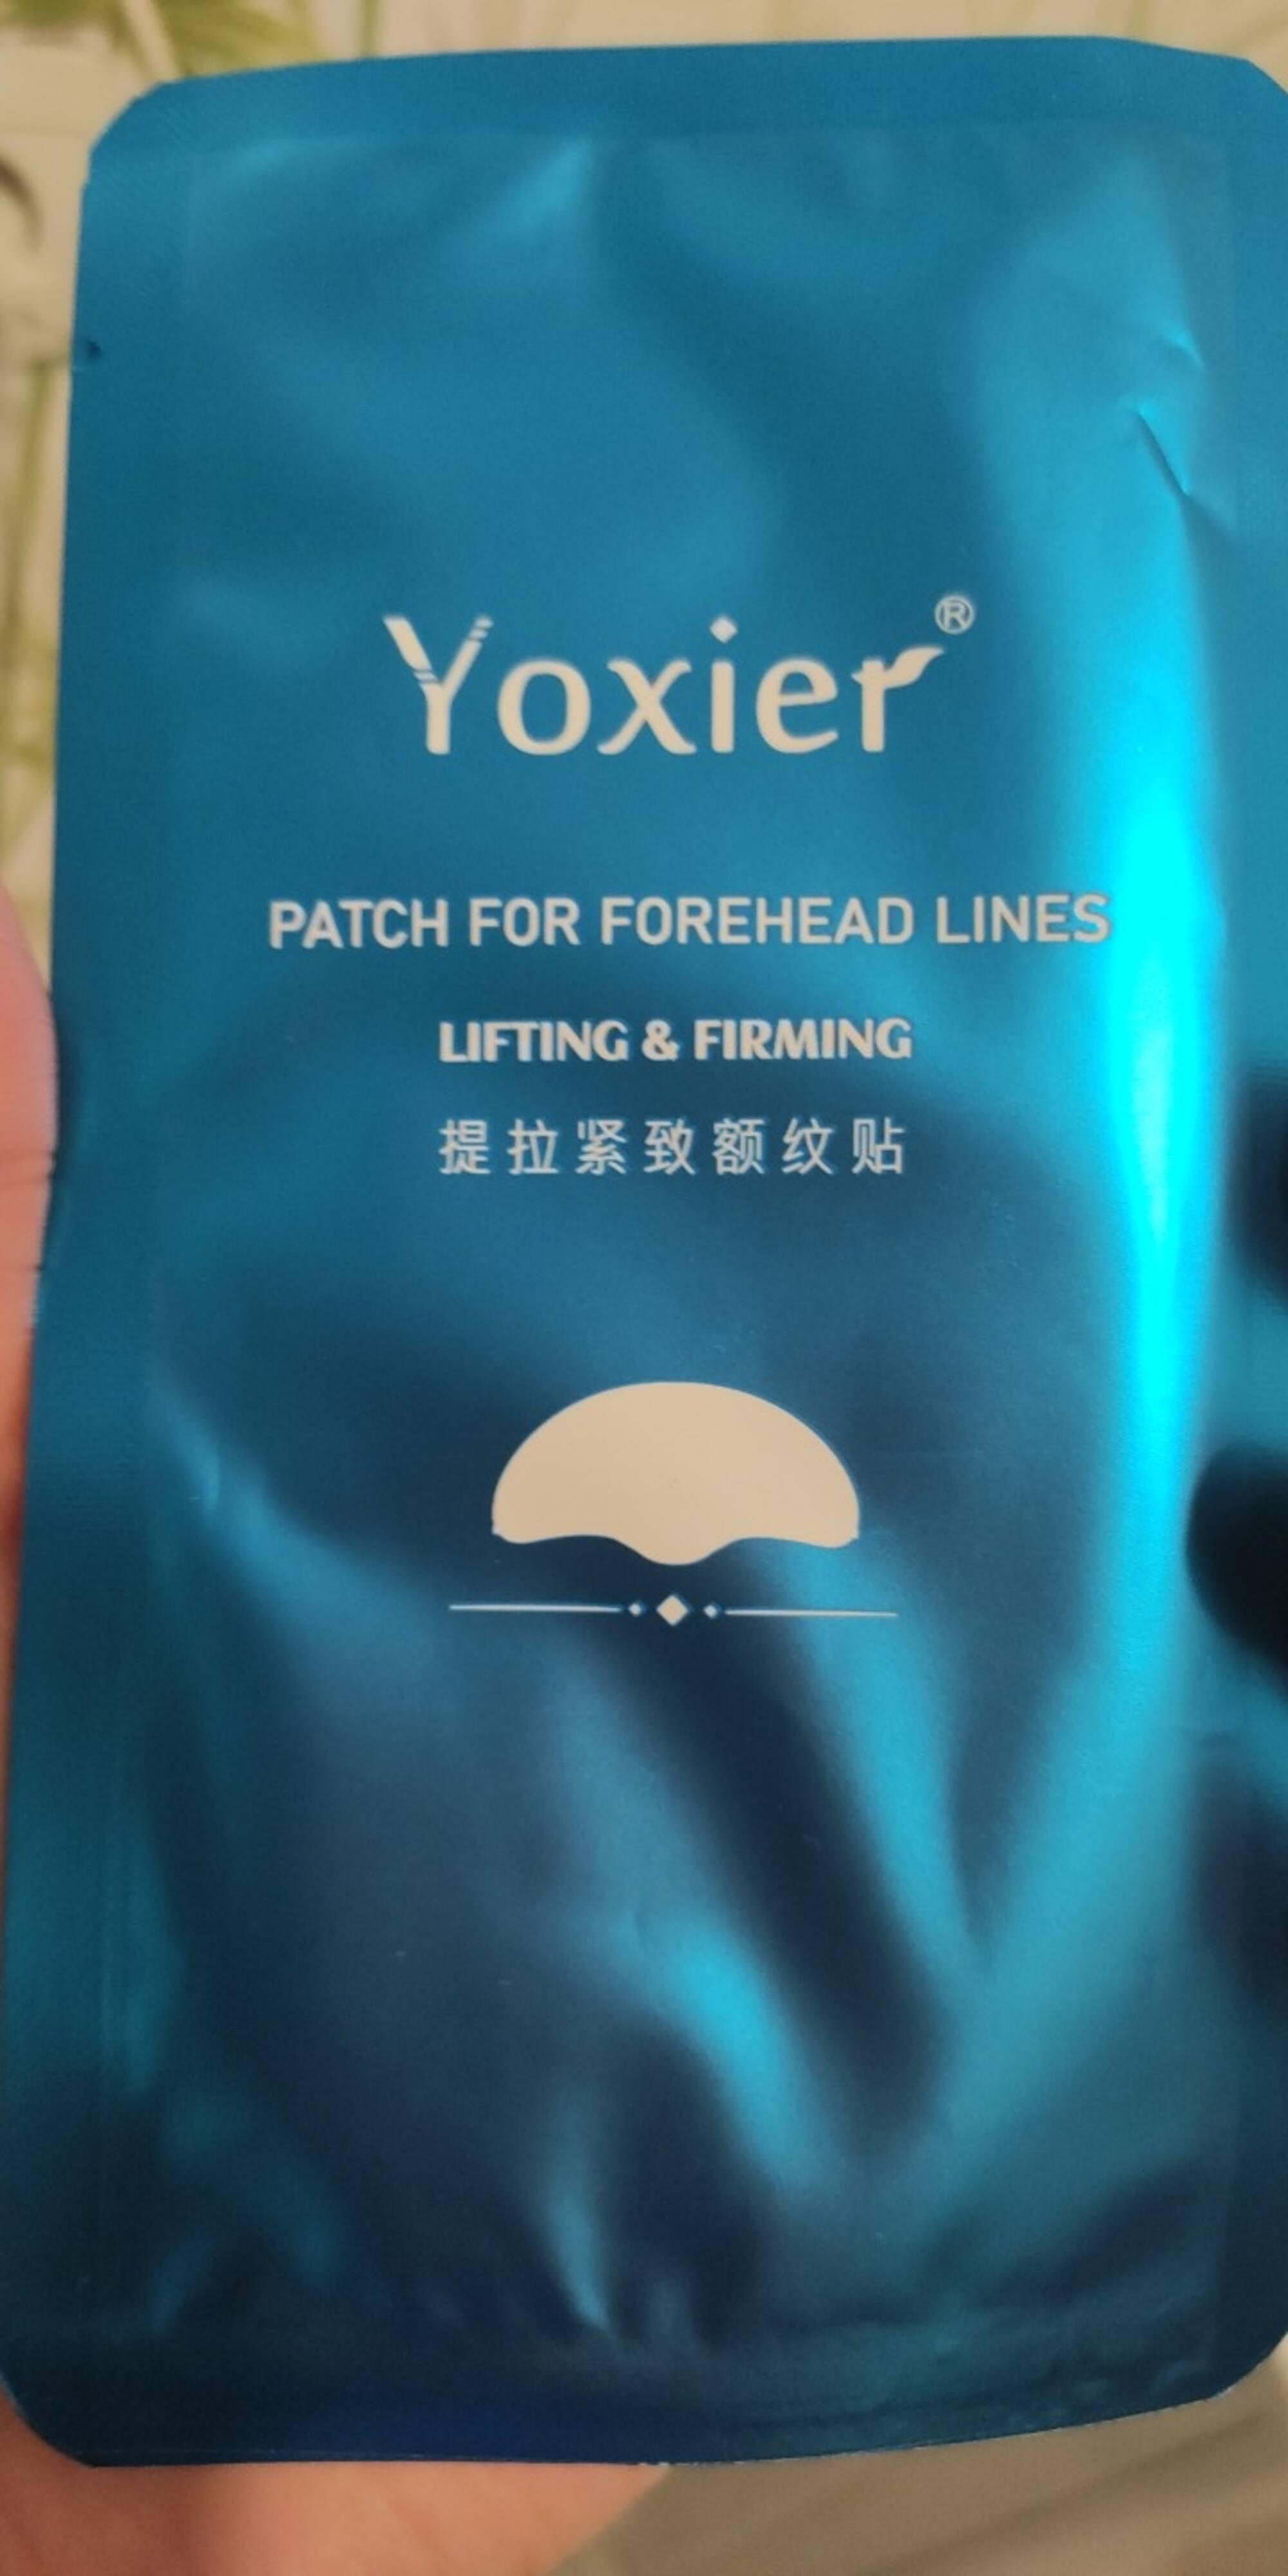 YOXIER - Patch for forehead lines - Lifting & firming